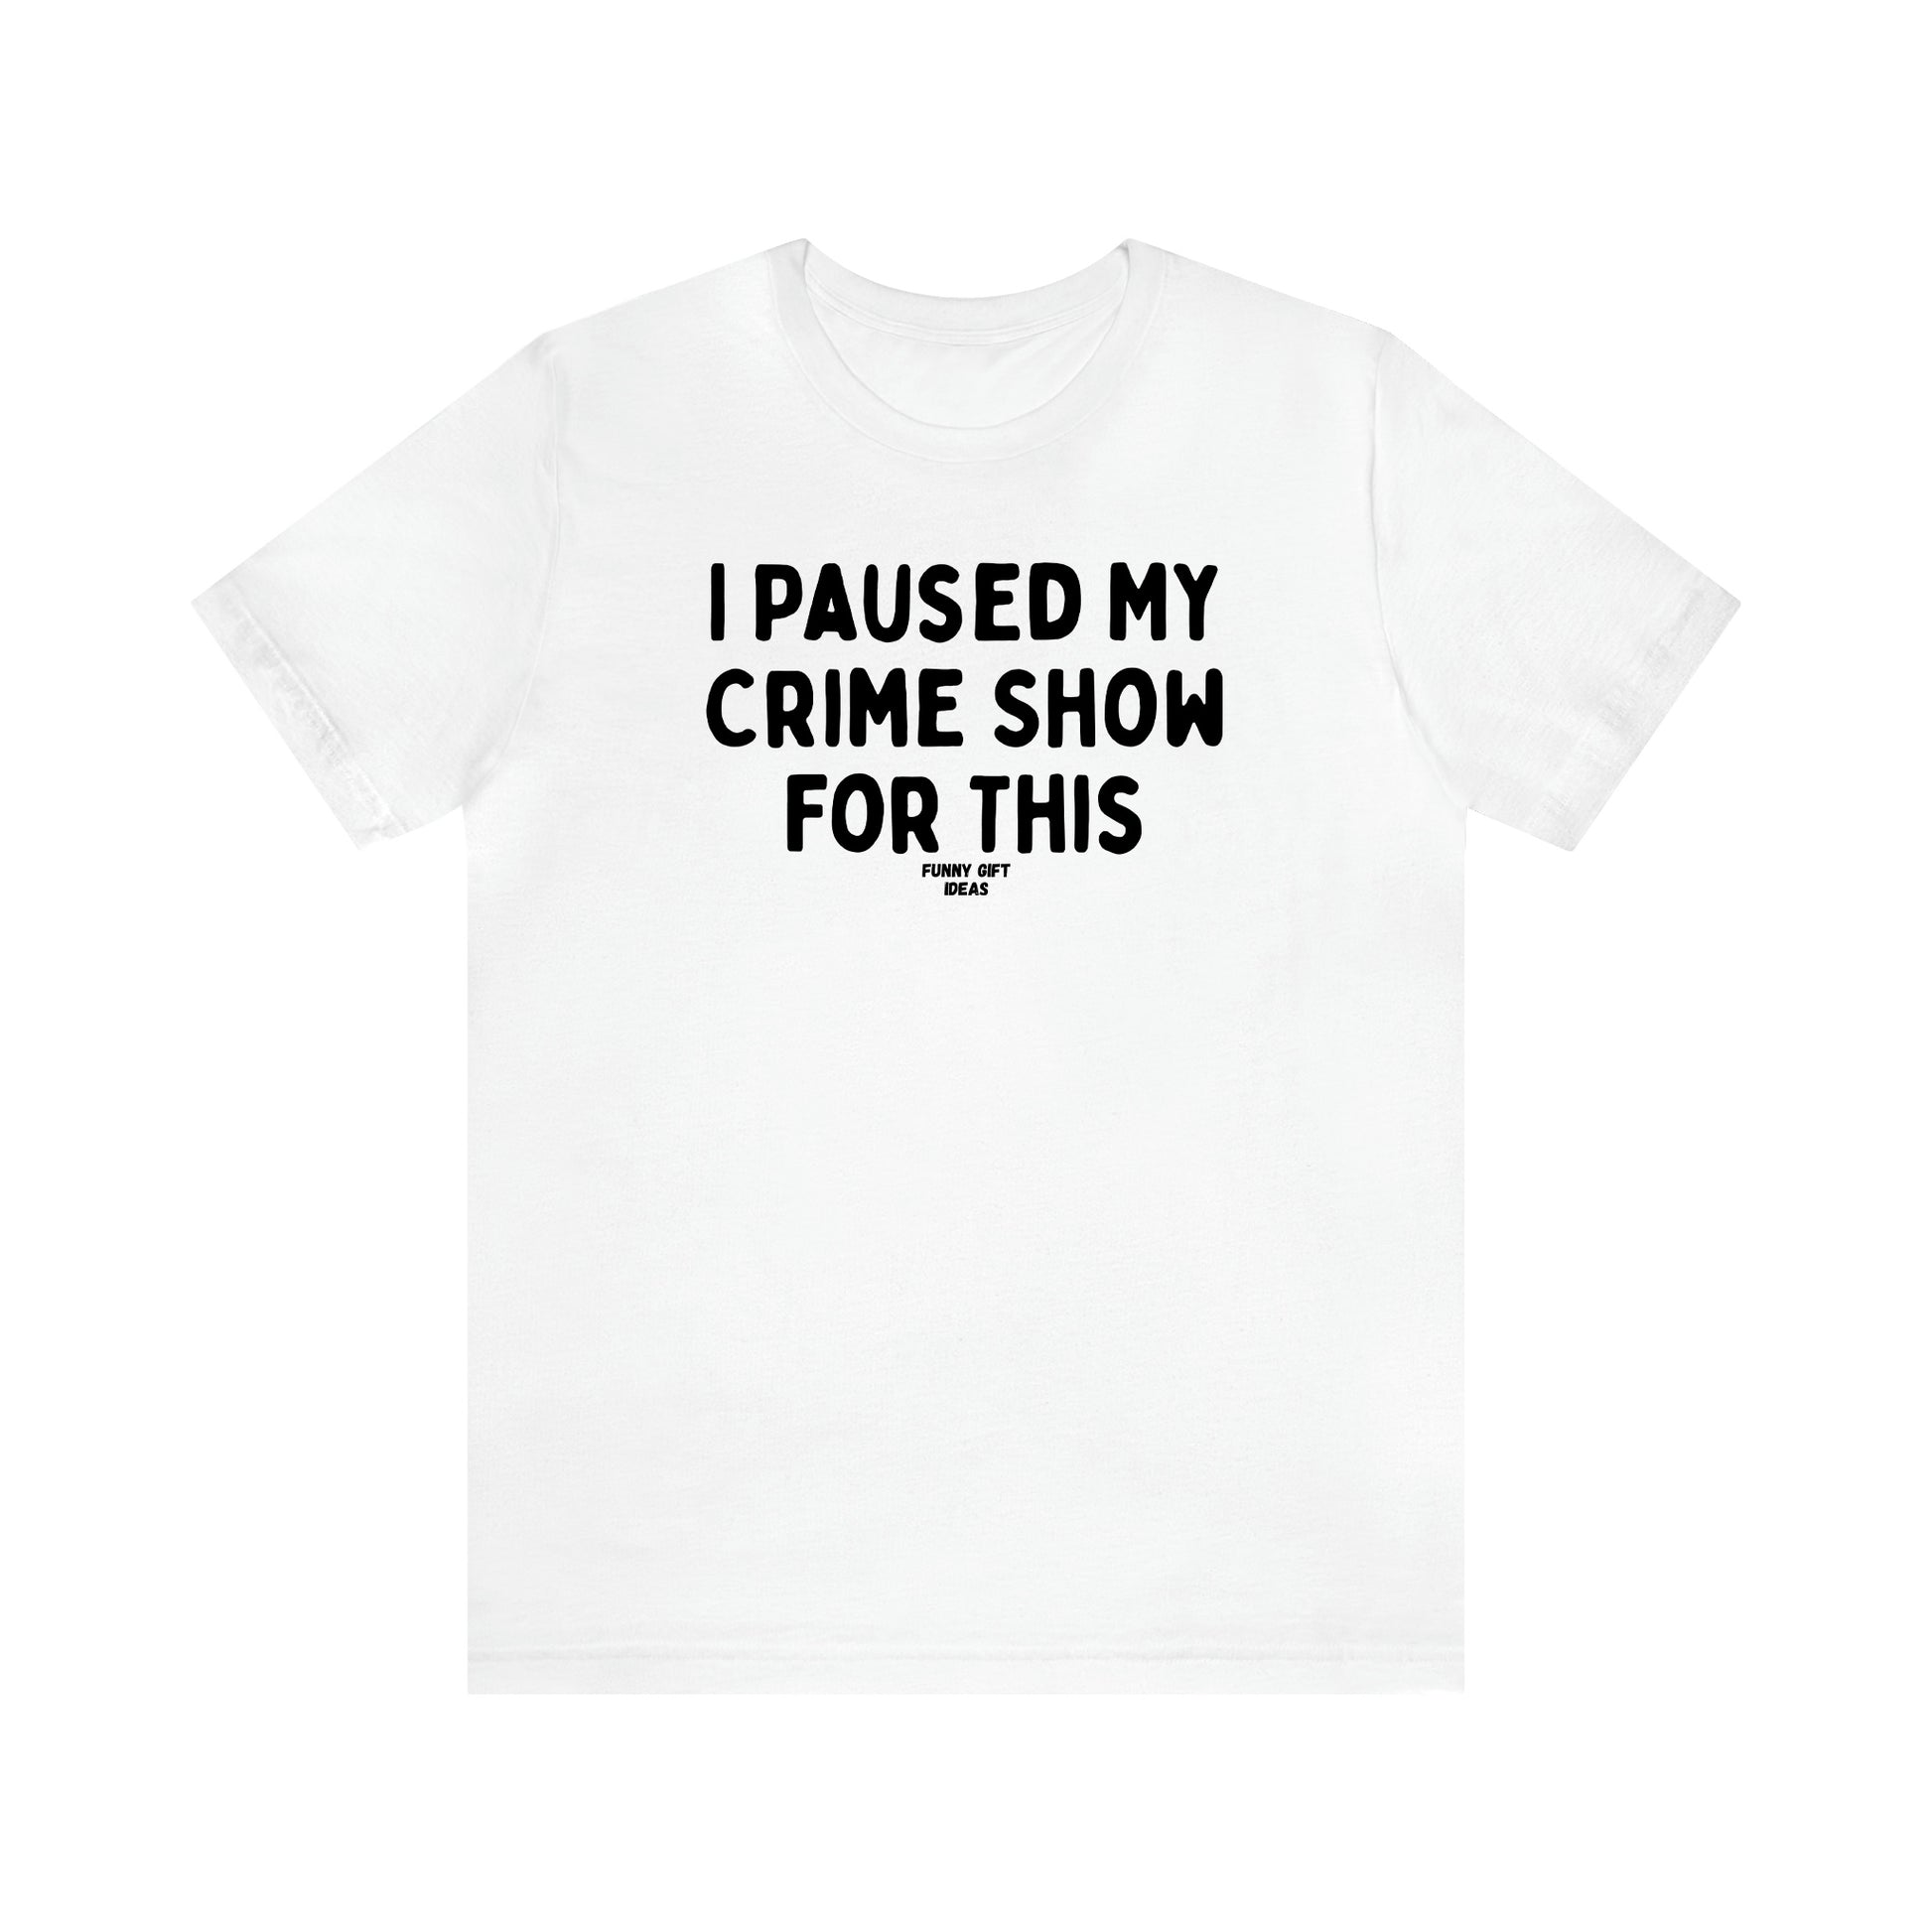 Women's T Shirts I Paused My Crime Show for This - Funny Gift Ideas